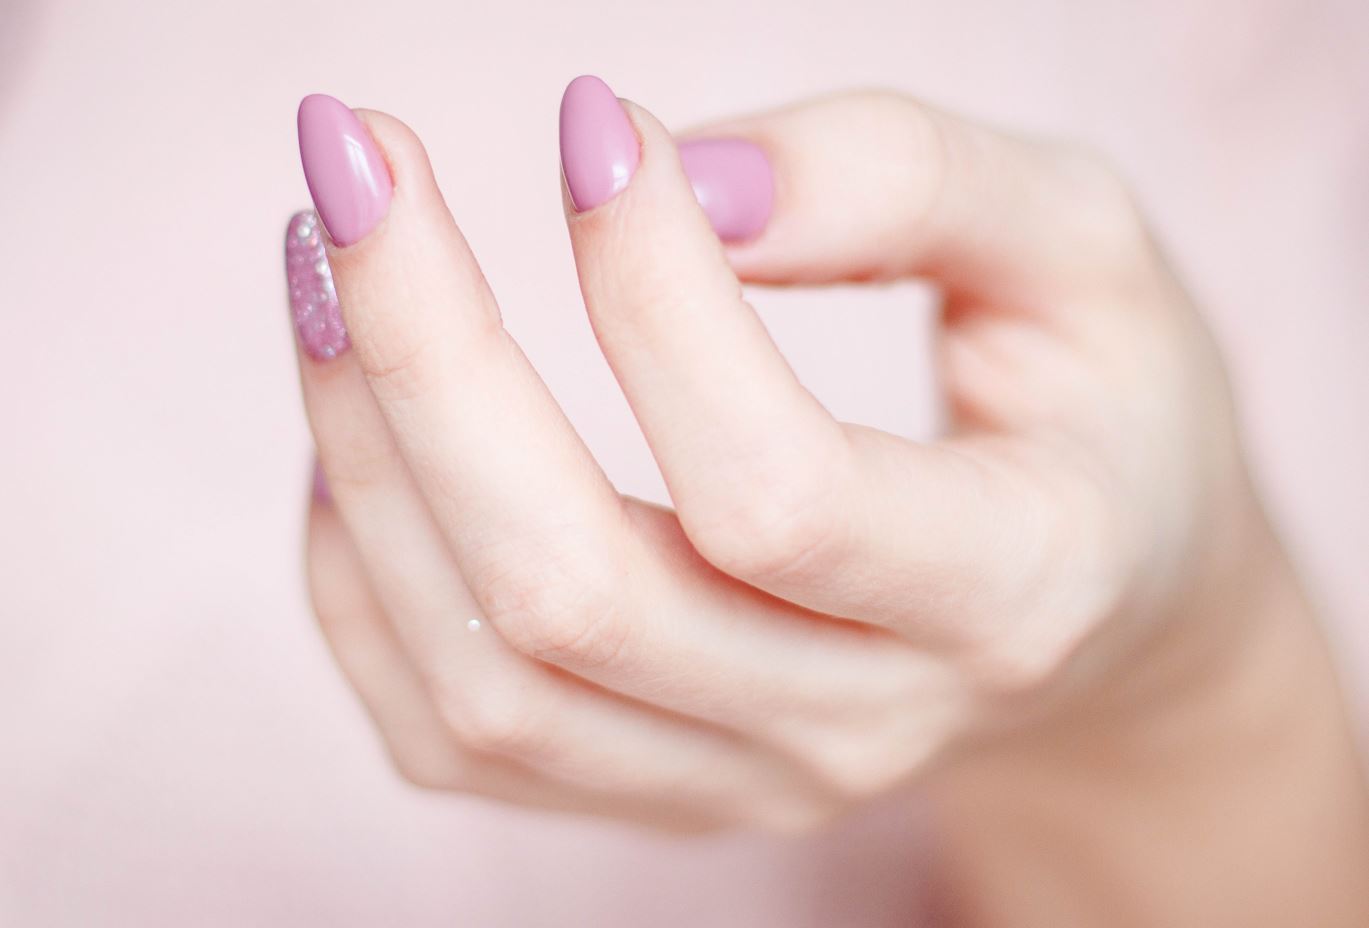 Woman's hand with light pink manicured nails